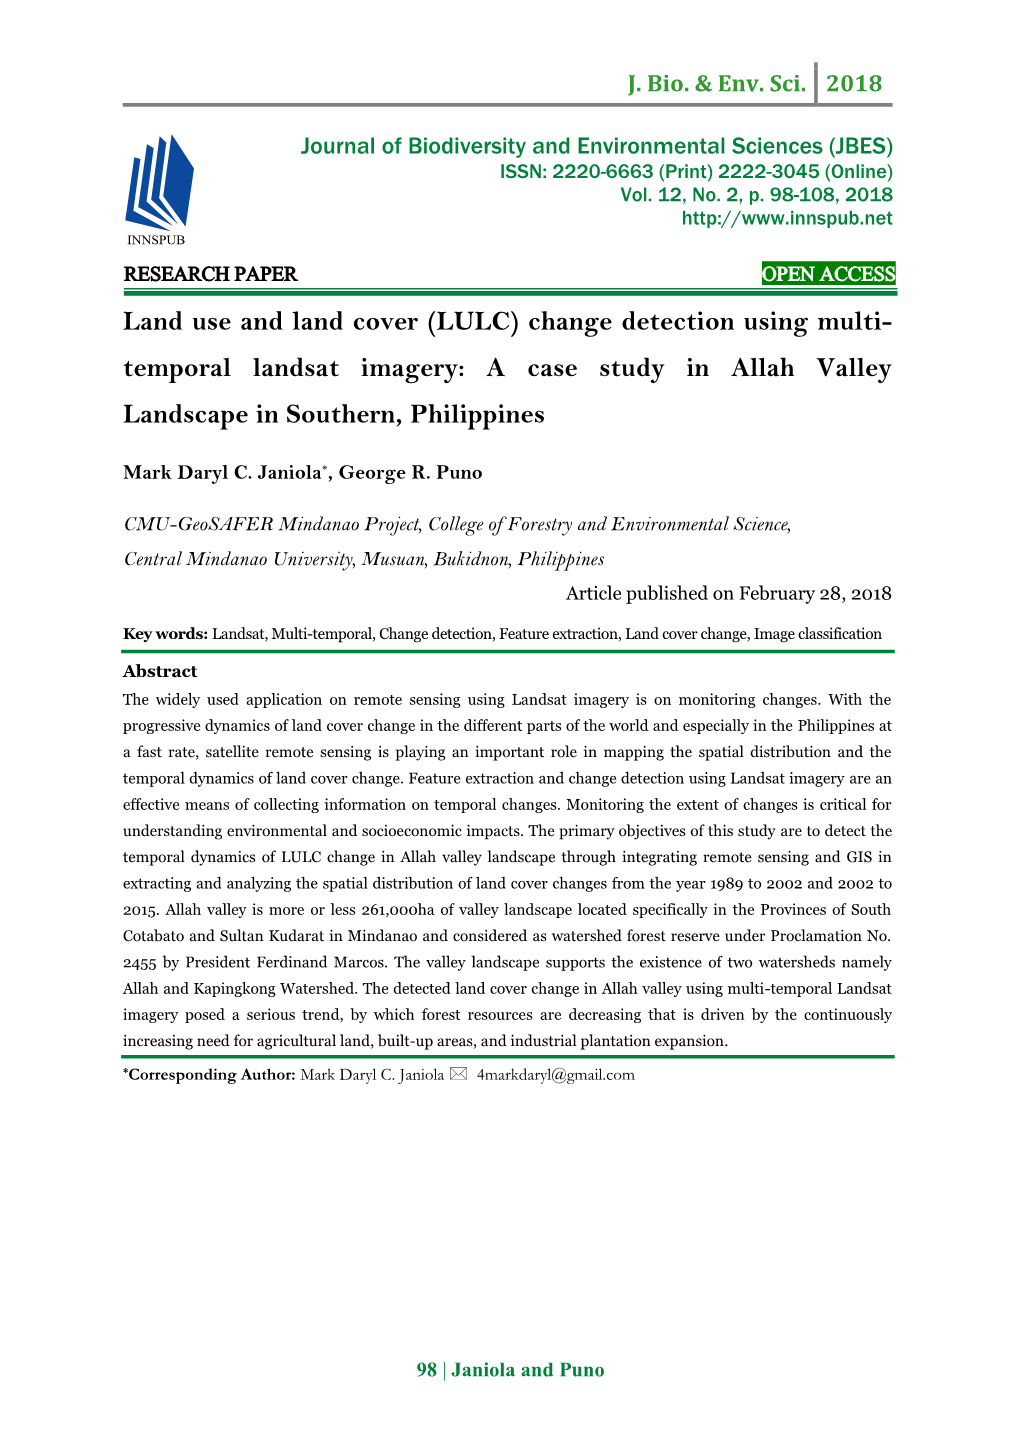 Download the Full Paper